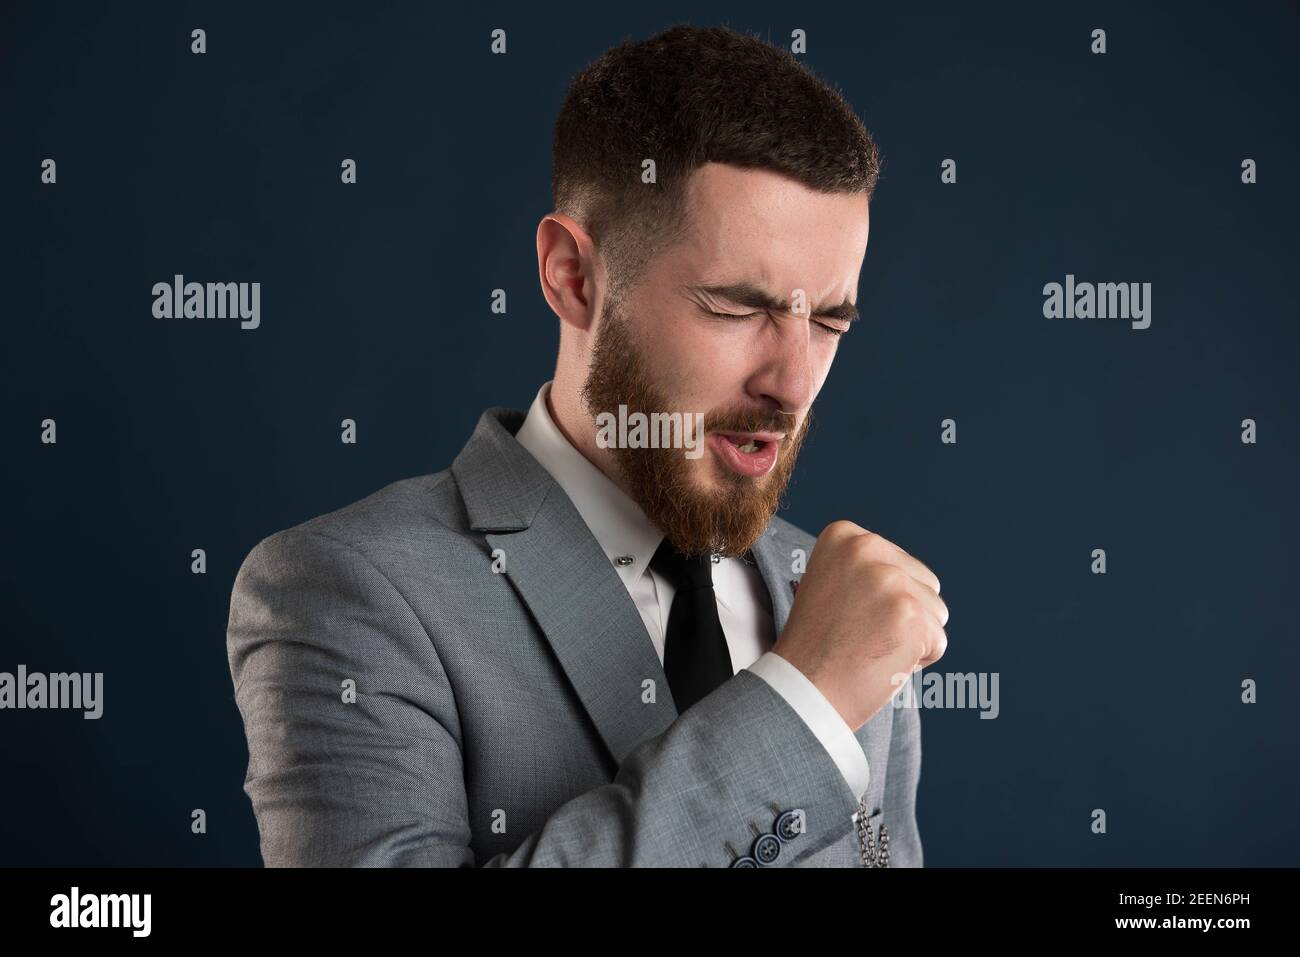 Handsome young businessman cauching wearing a black tie and a grey suit Stock Photo